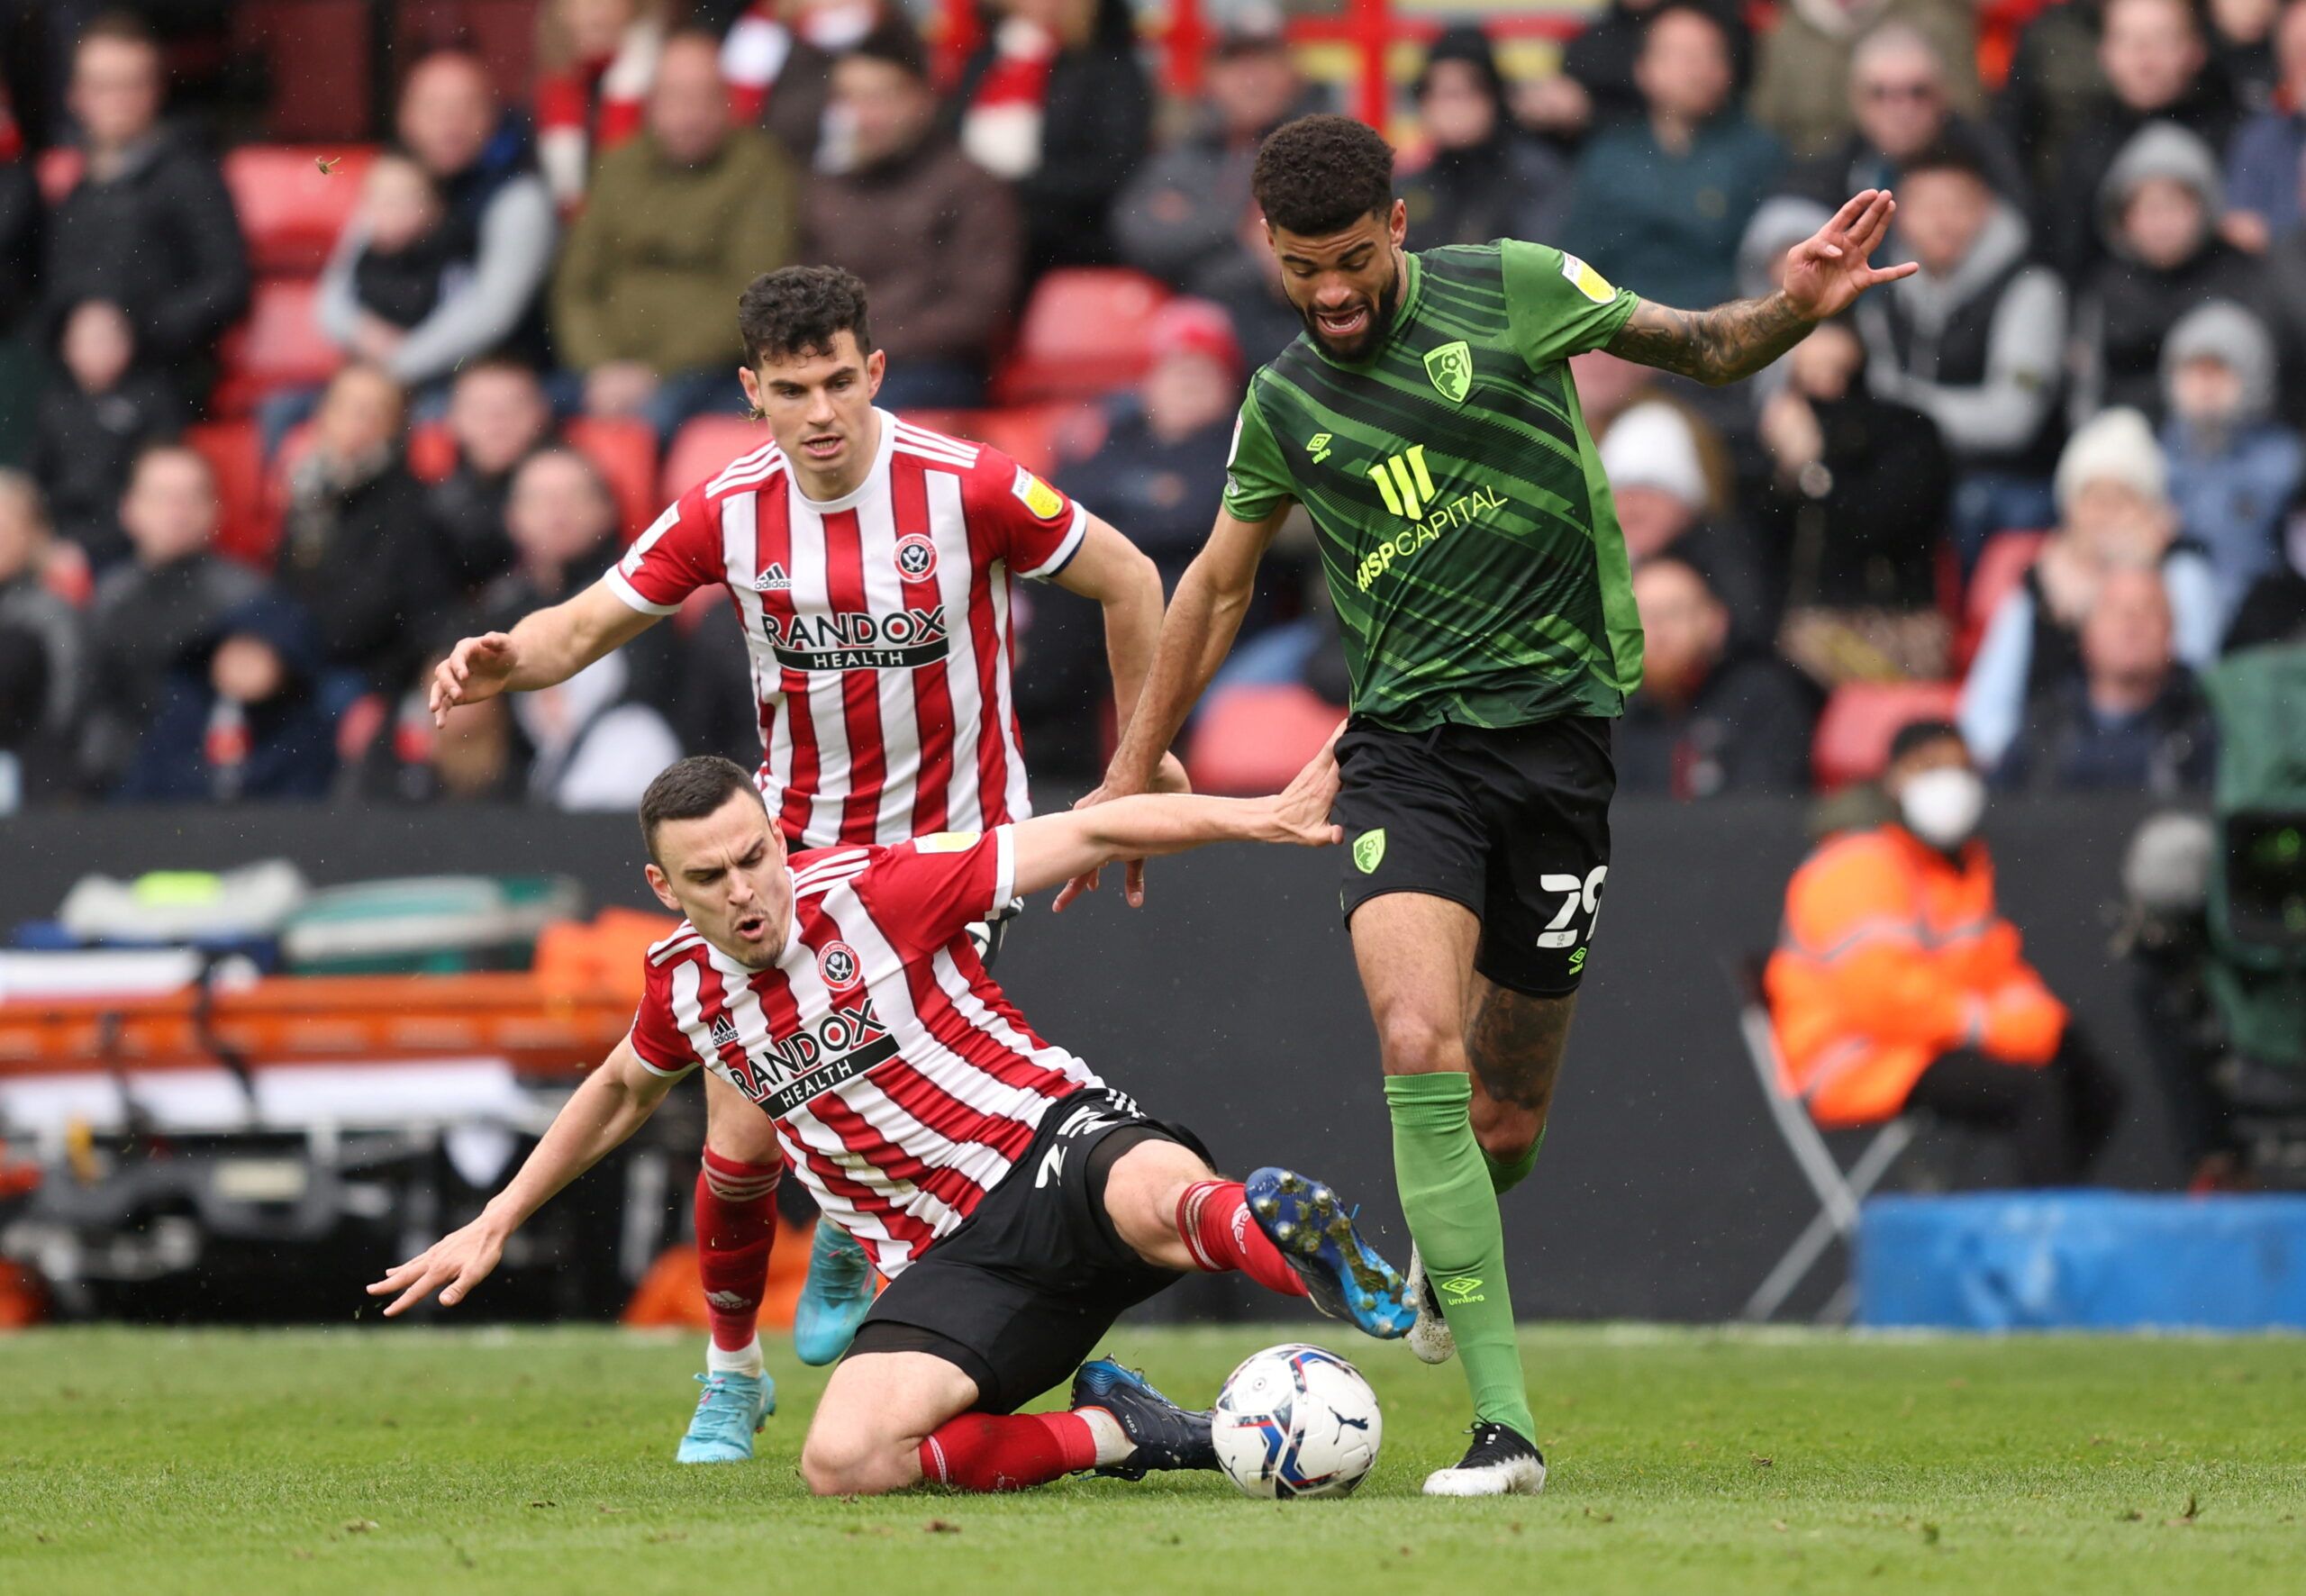 Soccer Football - Championship - Sheffield United v AFC Bournemouth, Bramall Lane, Sheffield, Britain - April 9, 2022 AFC Bournemouth's Philip Billing in action with Sheffield United's Filip Uremovic  Action Images/John Clifton  EDITORIAL USE ONLY. No use with unauthorized audio, video, data, fixture lists, club/league logos or 